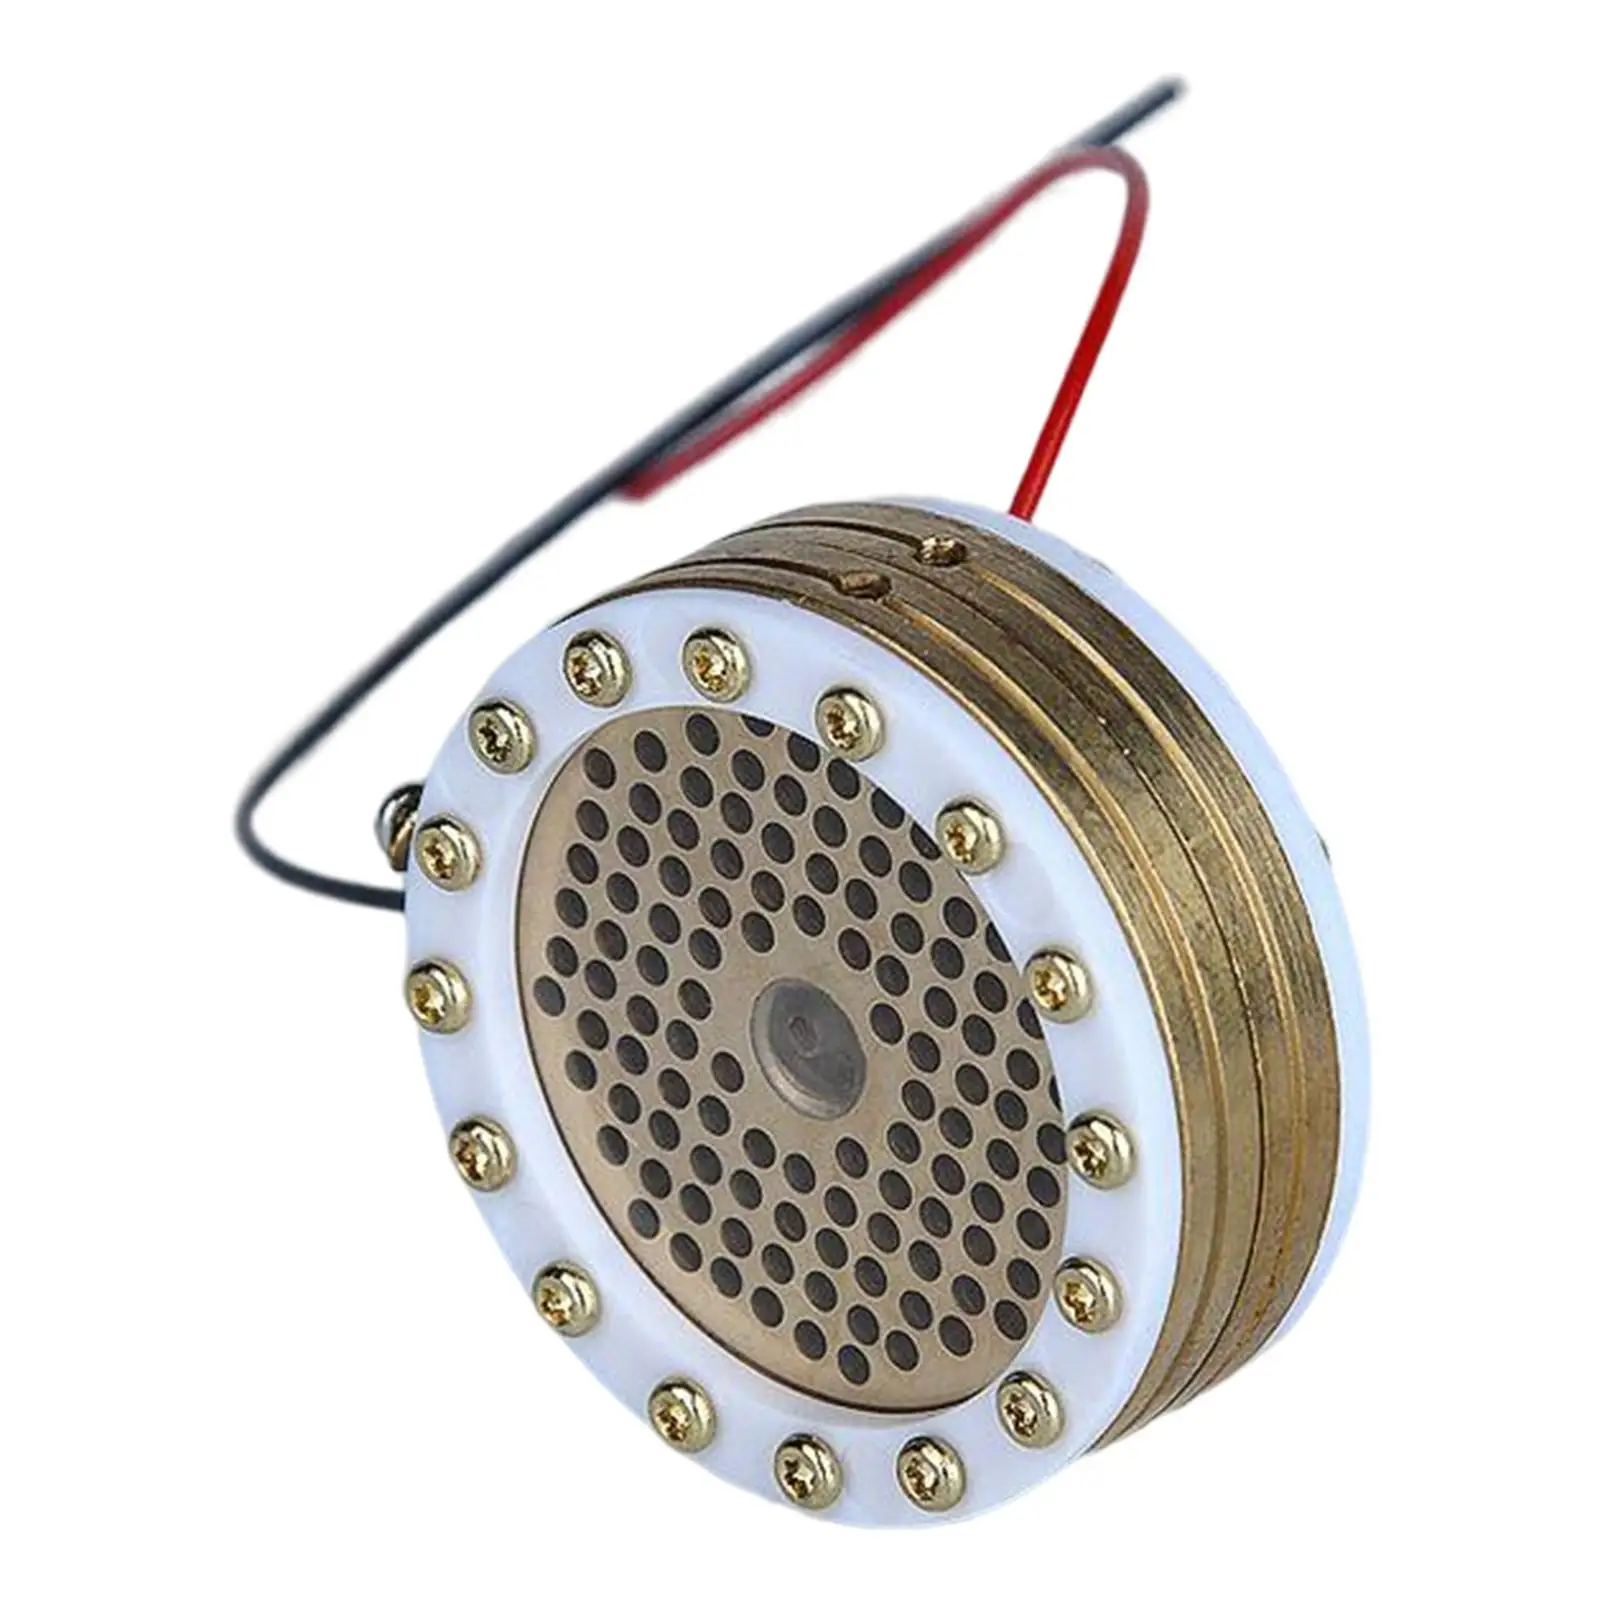 34mm/1.33 inch Capsule Large Diaphragm Condenser Microphone Capsule Single Sided Gold Plated for Professional Recording